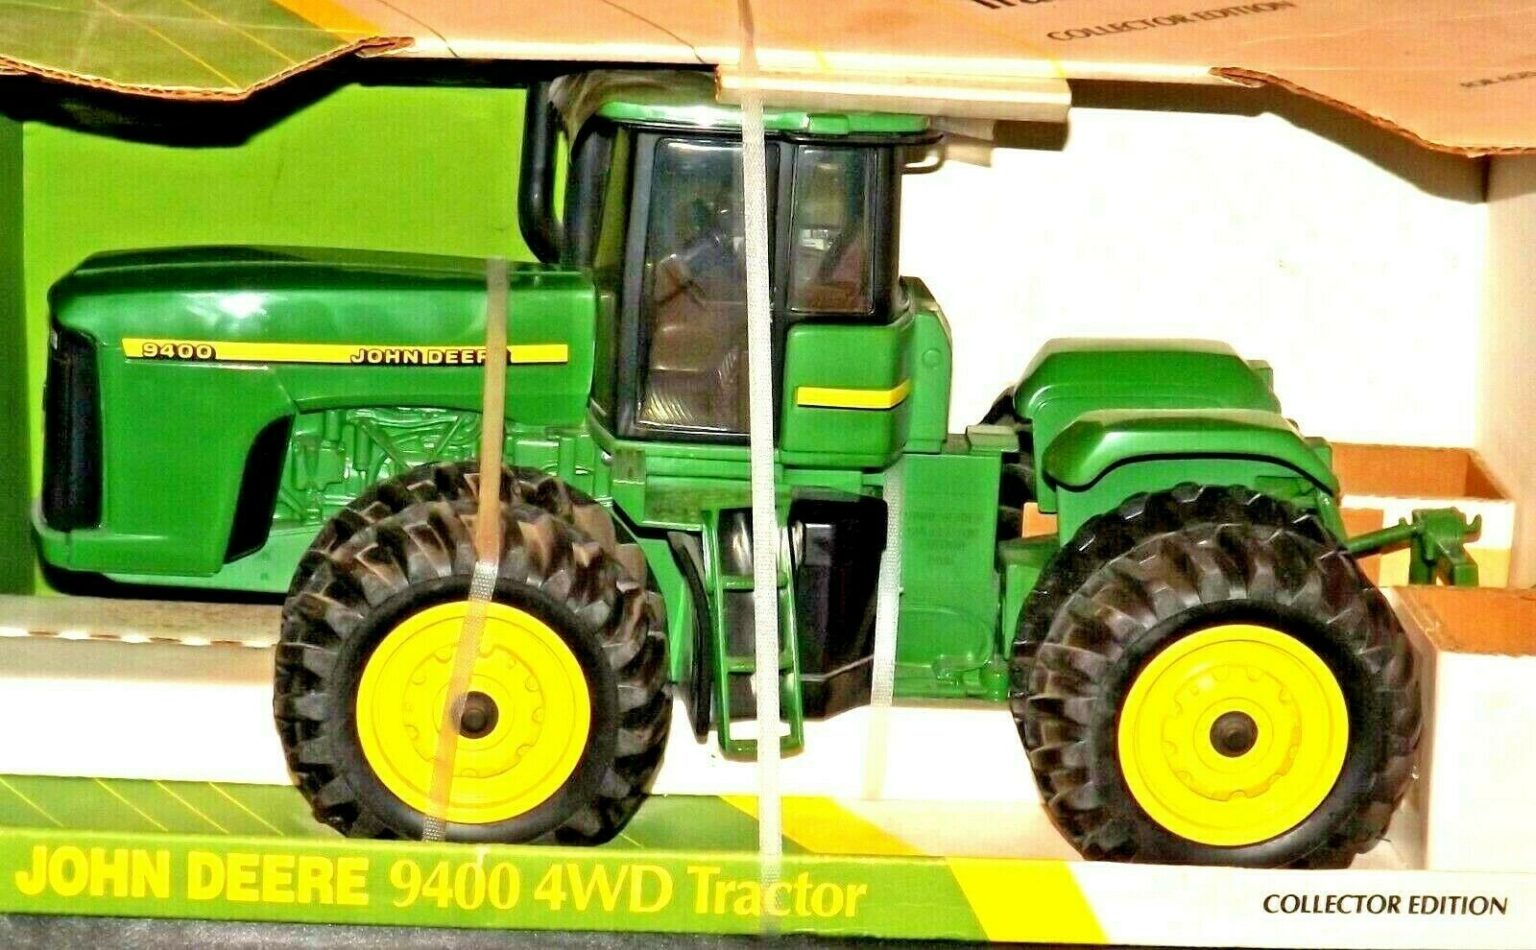 1996 John Deere 9400 4 Wd Replica Toy Tractor Collector Edition 116 Scale Ertl Angels Auction 2897